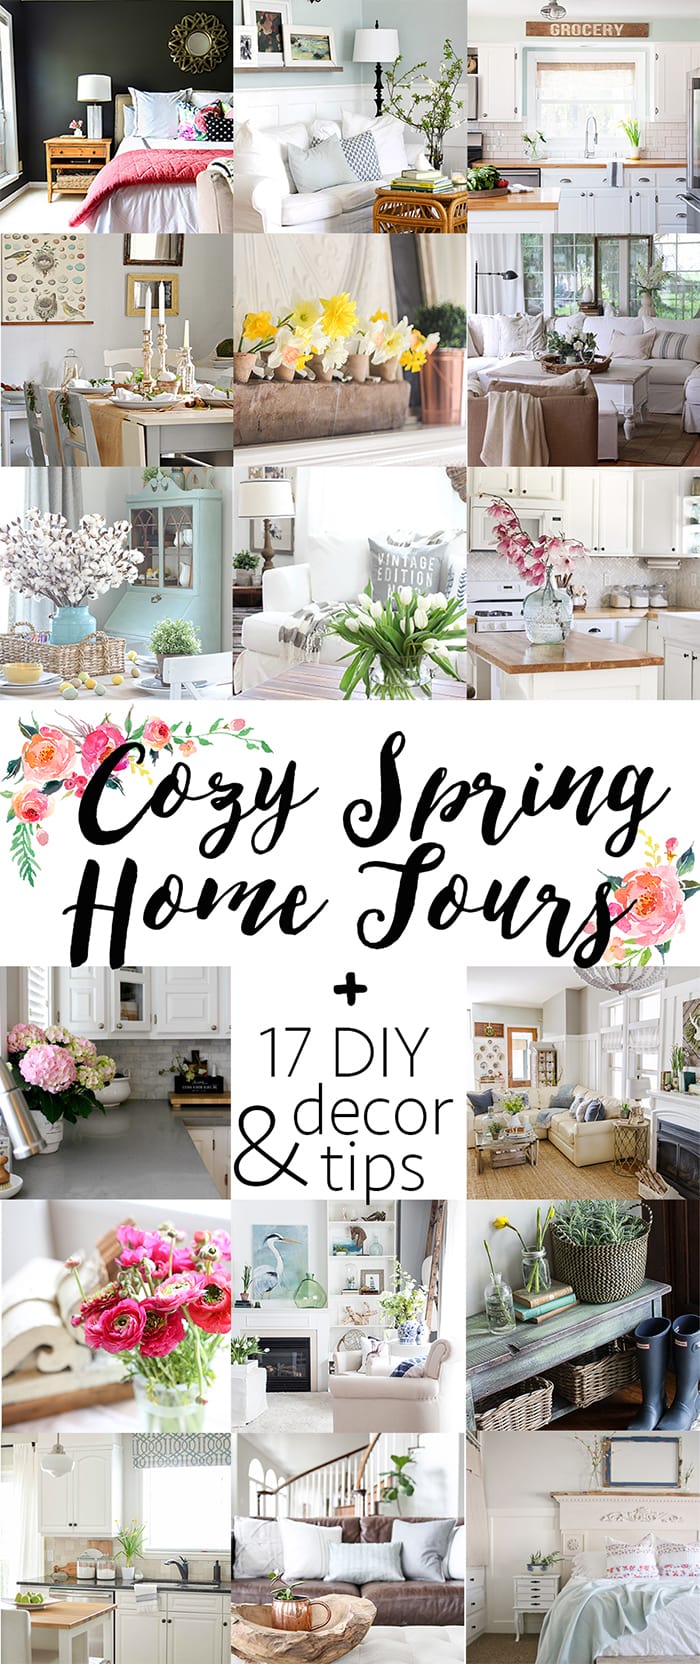 So many beautiful homes! Spring decorating ideas, diy tips, and more in these spring home tours | maisondepax.com